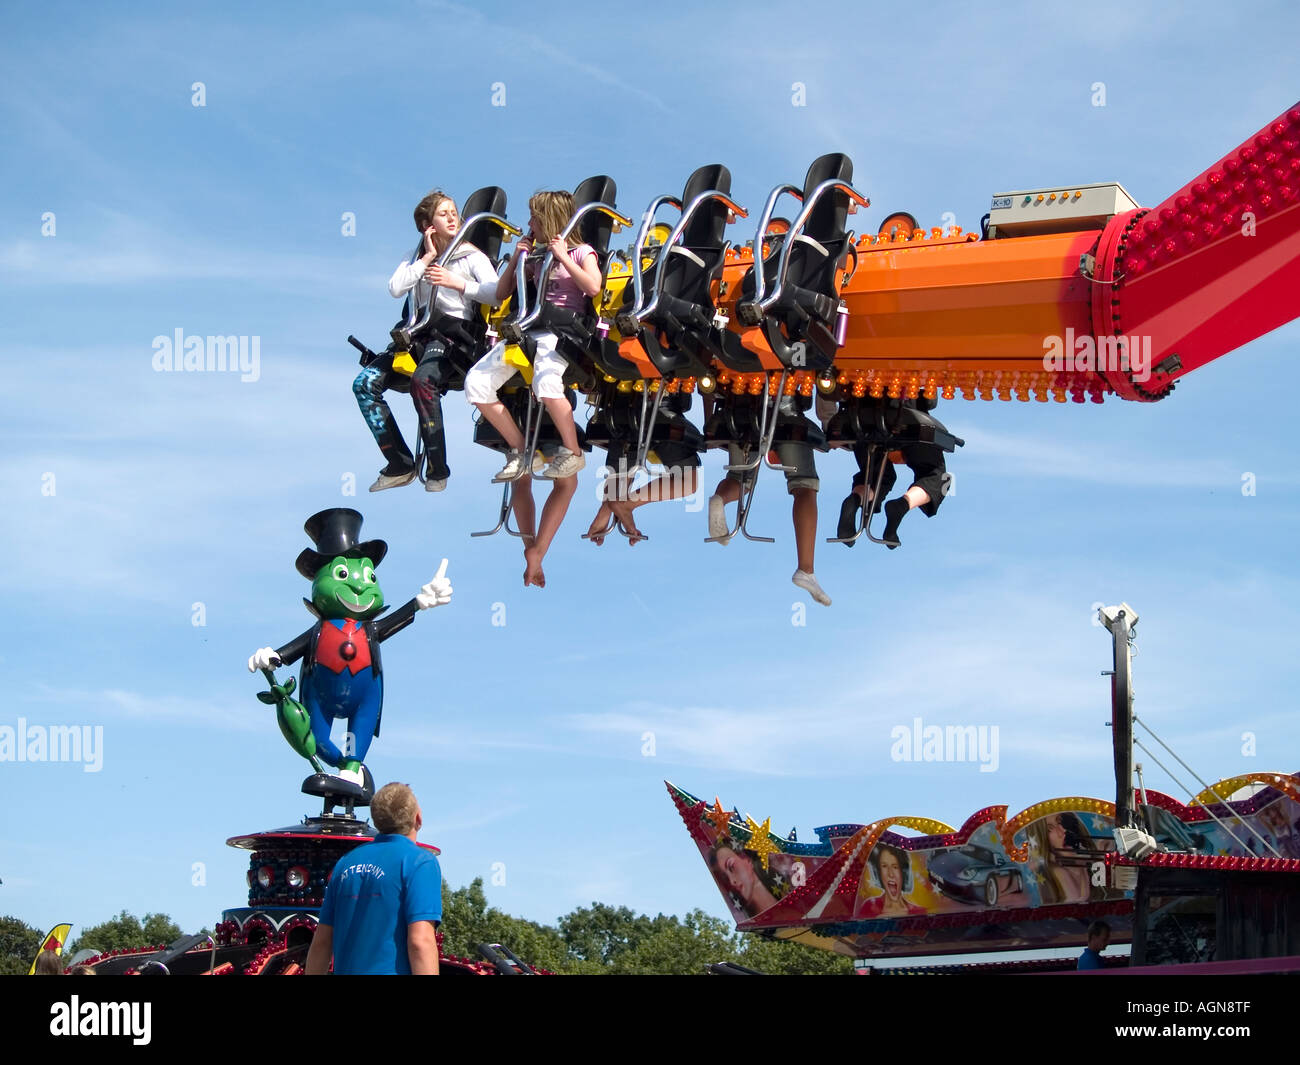 Fairground ride at Kirkleatham Redcar Cleveland UK, with a green man apparently pointing at riders 2006 Stock Photo